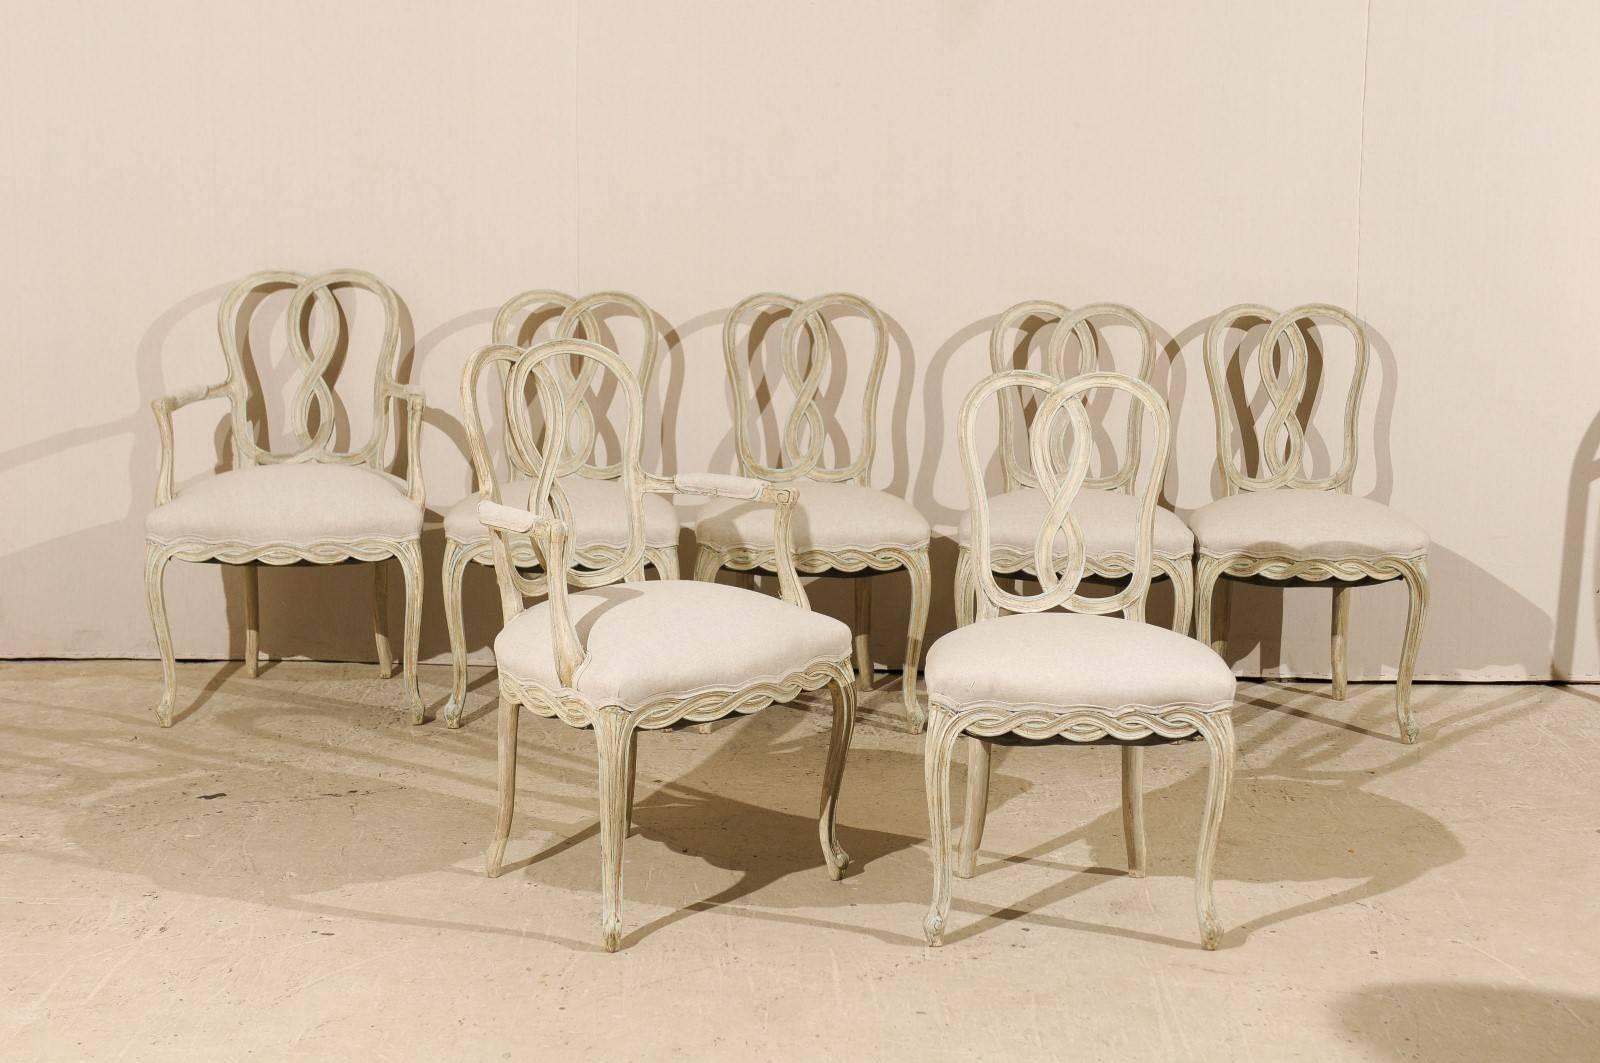 Carved Set of Eight Italian Venetian Style Painted Wood Chairs with Ribbon Motifs